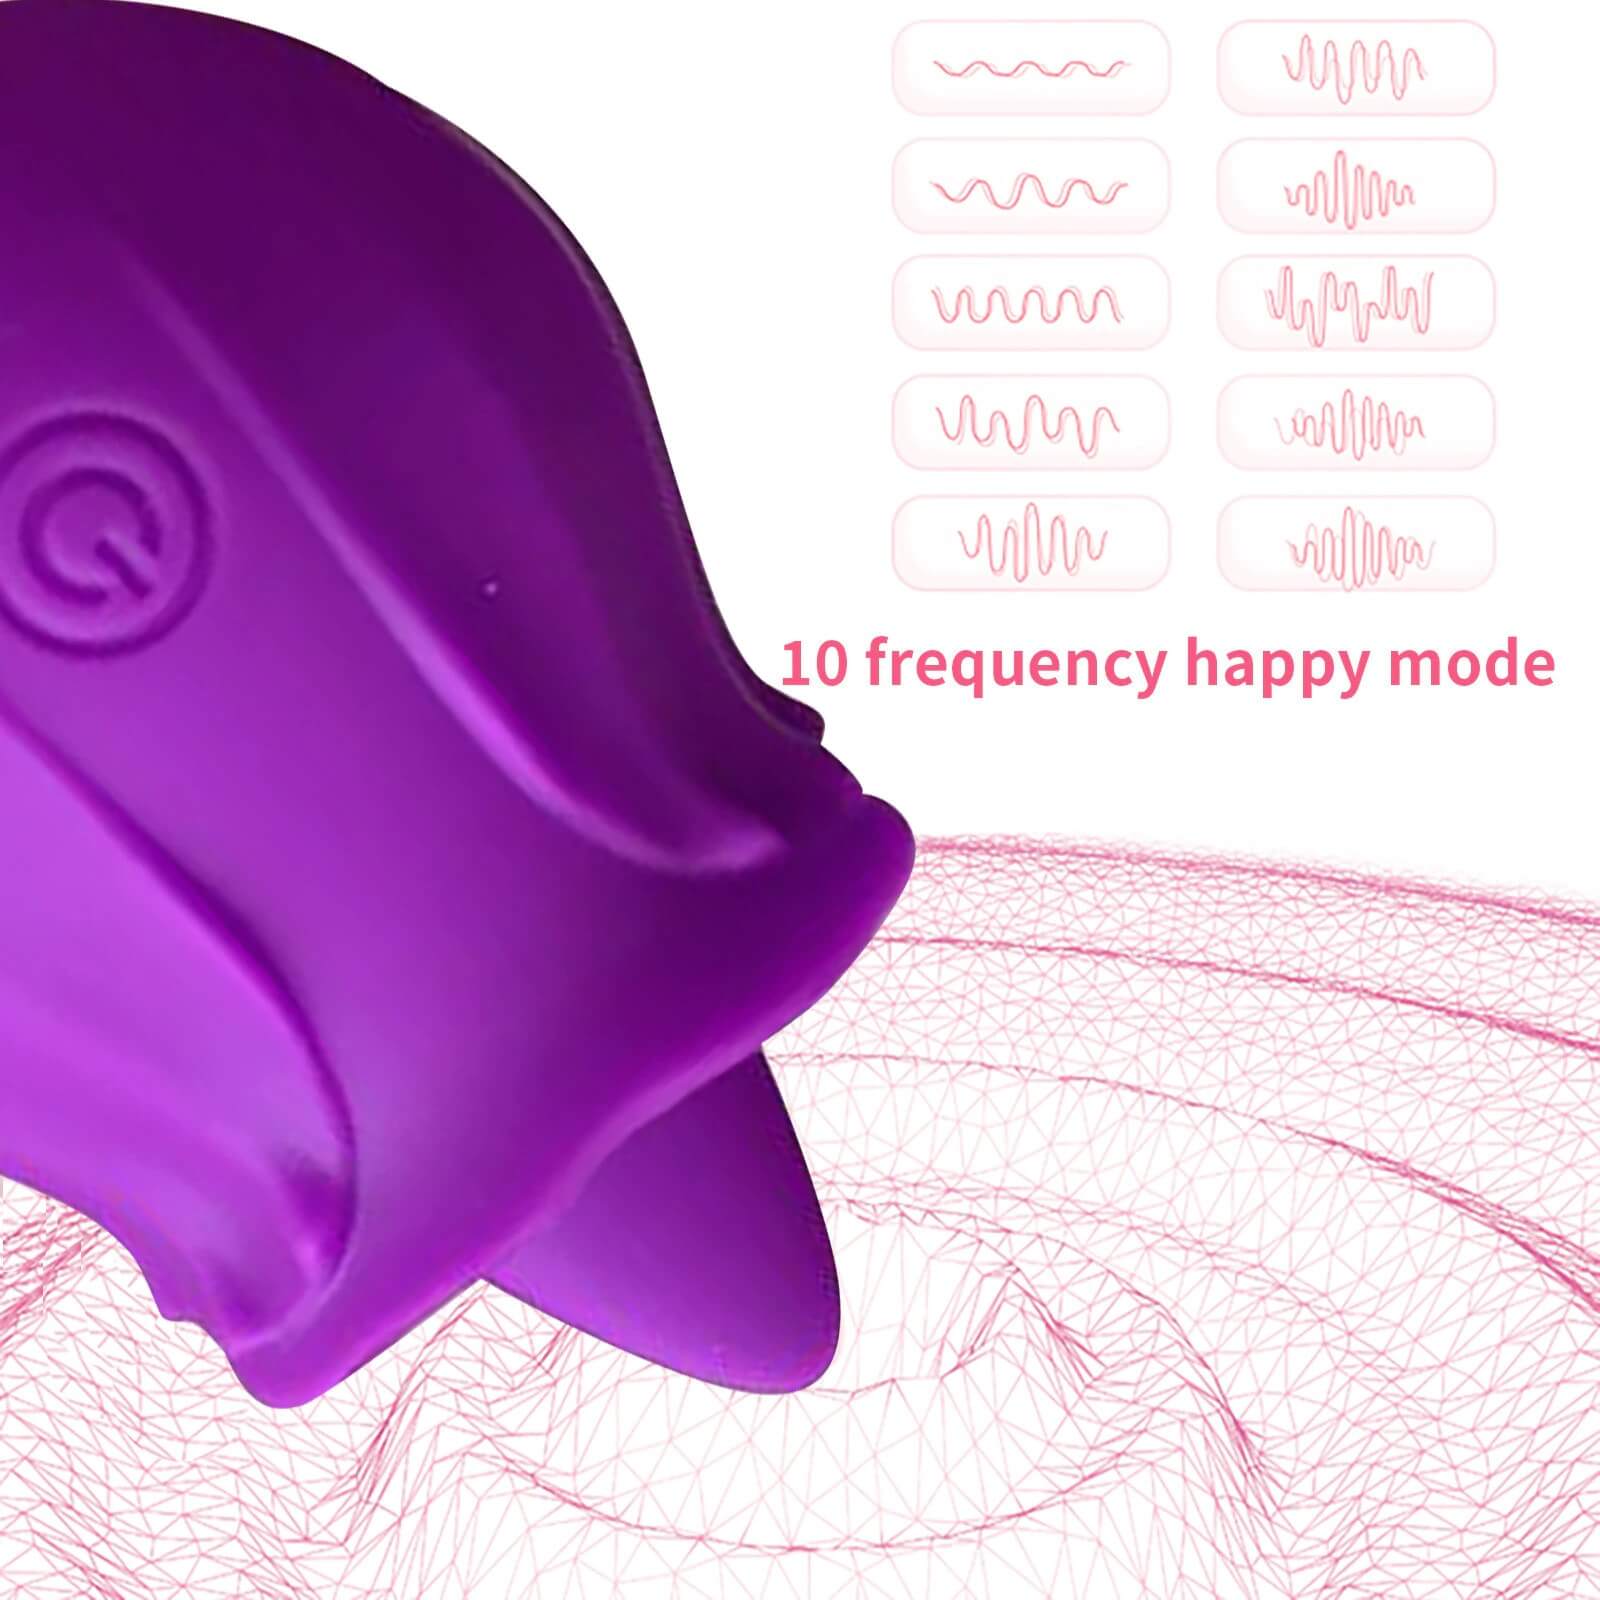 the rose toy with tongue 10 frequency happy mode